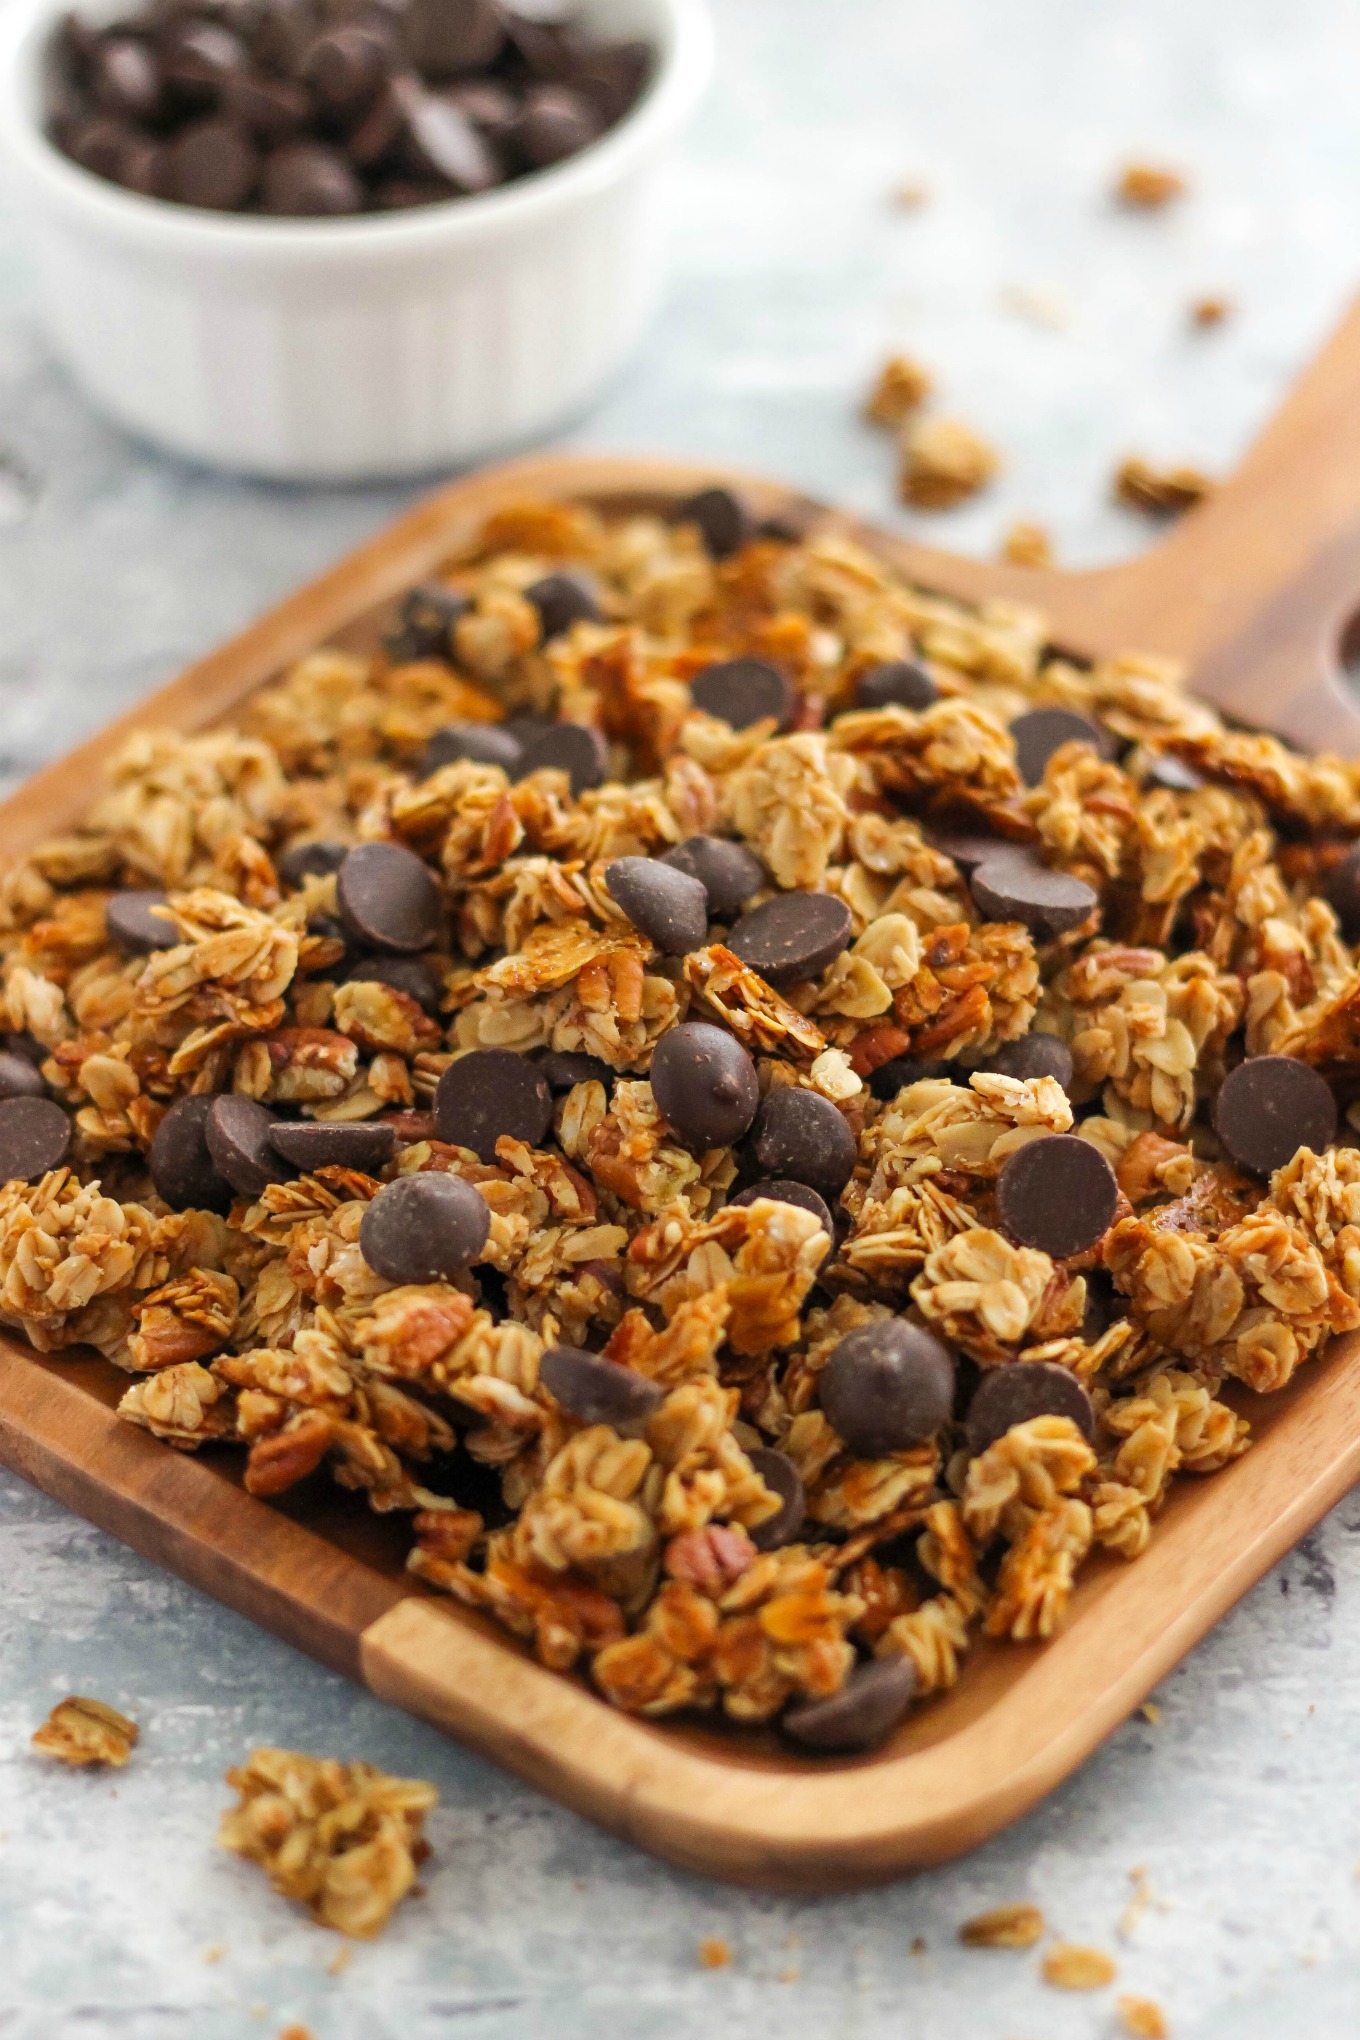 5-Ingredient Chocolate Chip Granola Recipe is an easy and healthy breakfast, snack, or topping option for yogurt and ice cream.